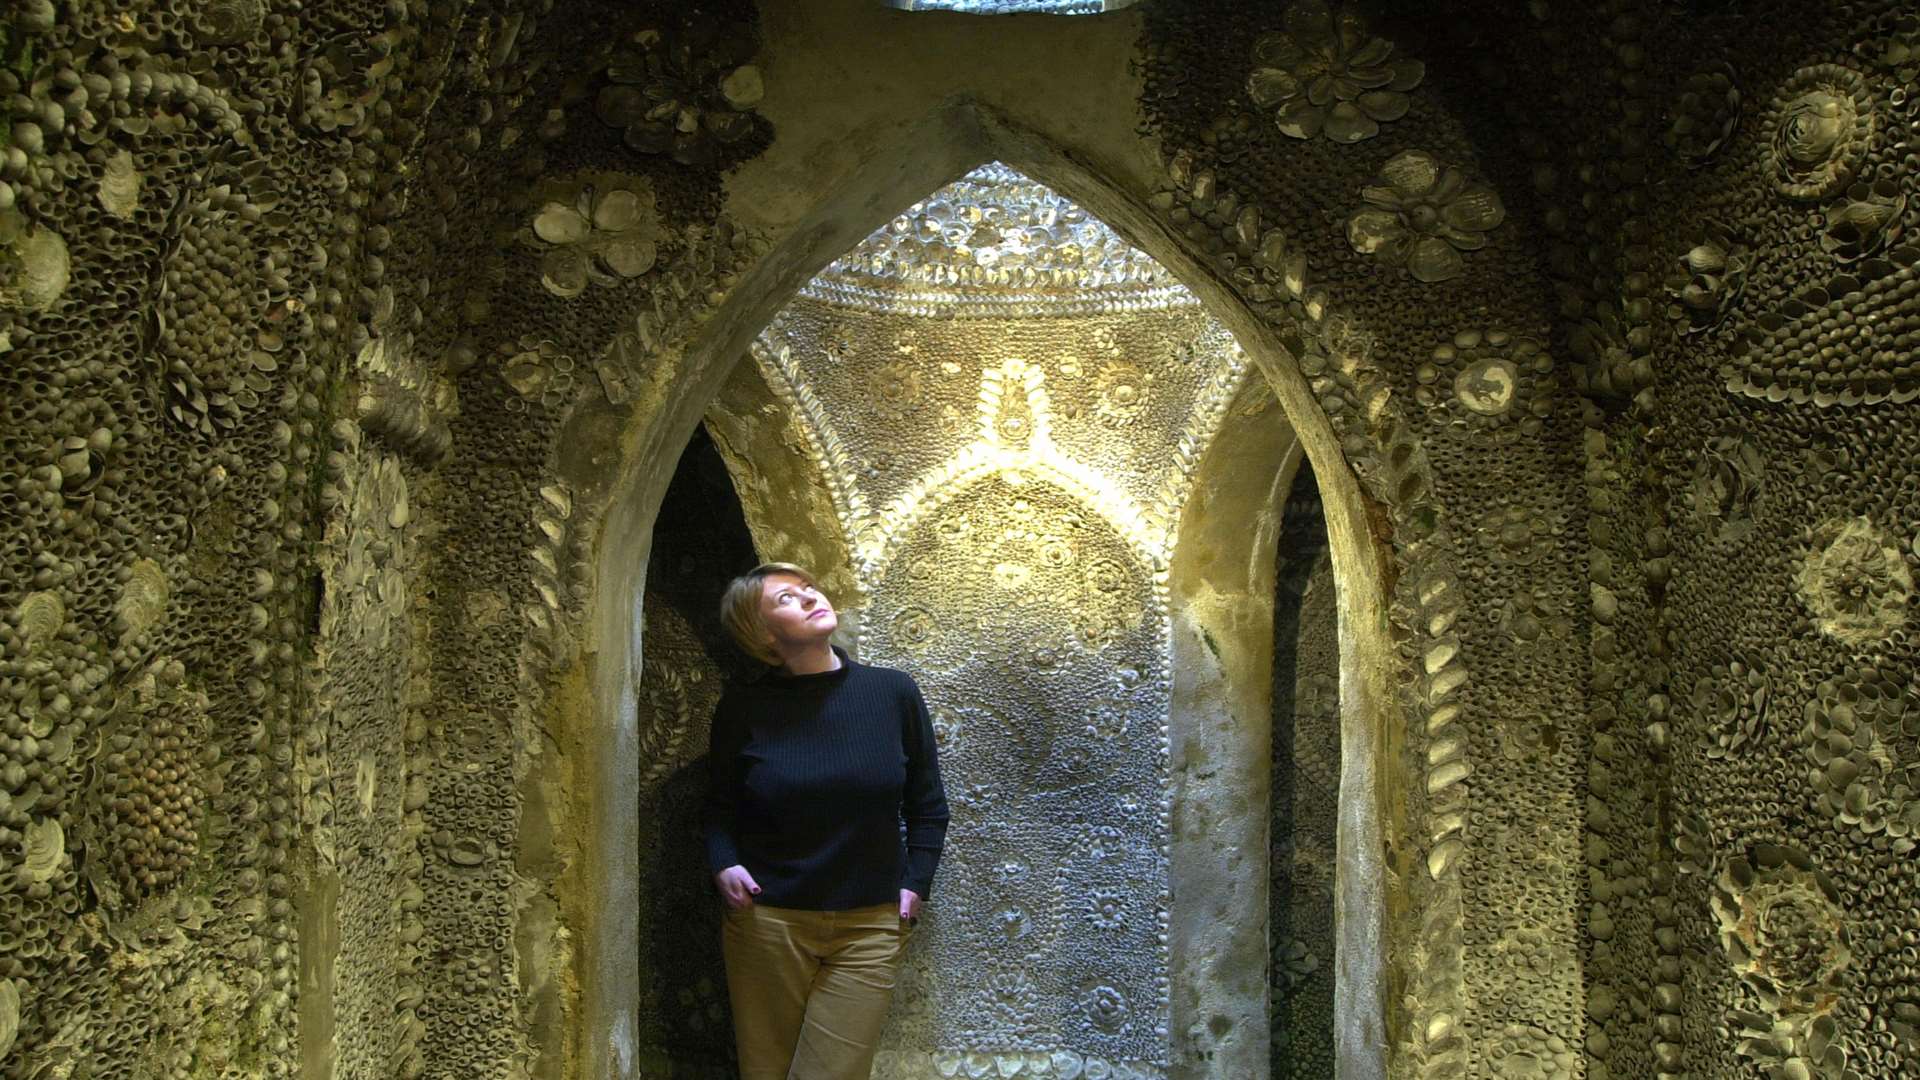 The Shell Grotto has mysterious origins